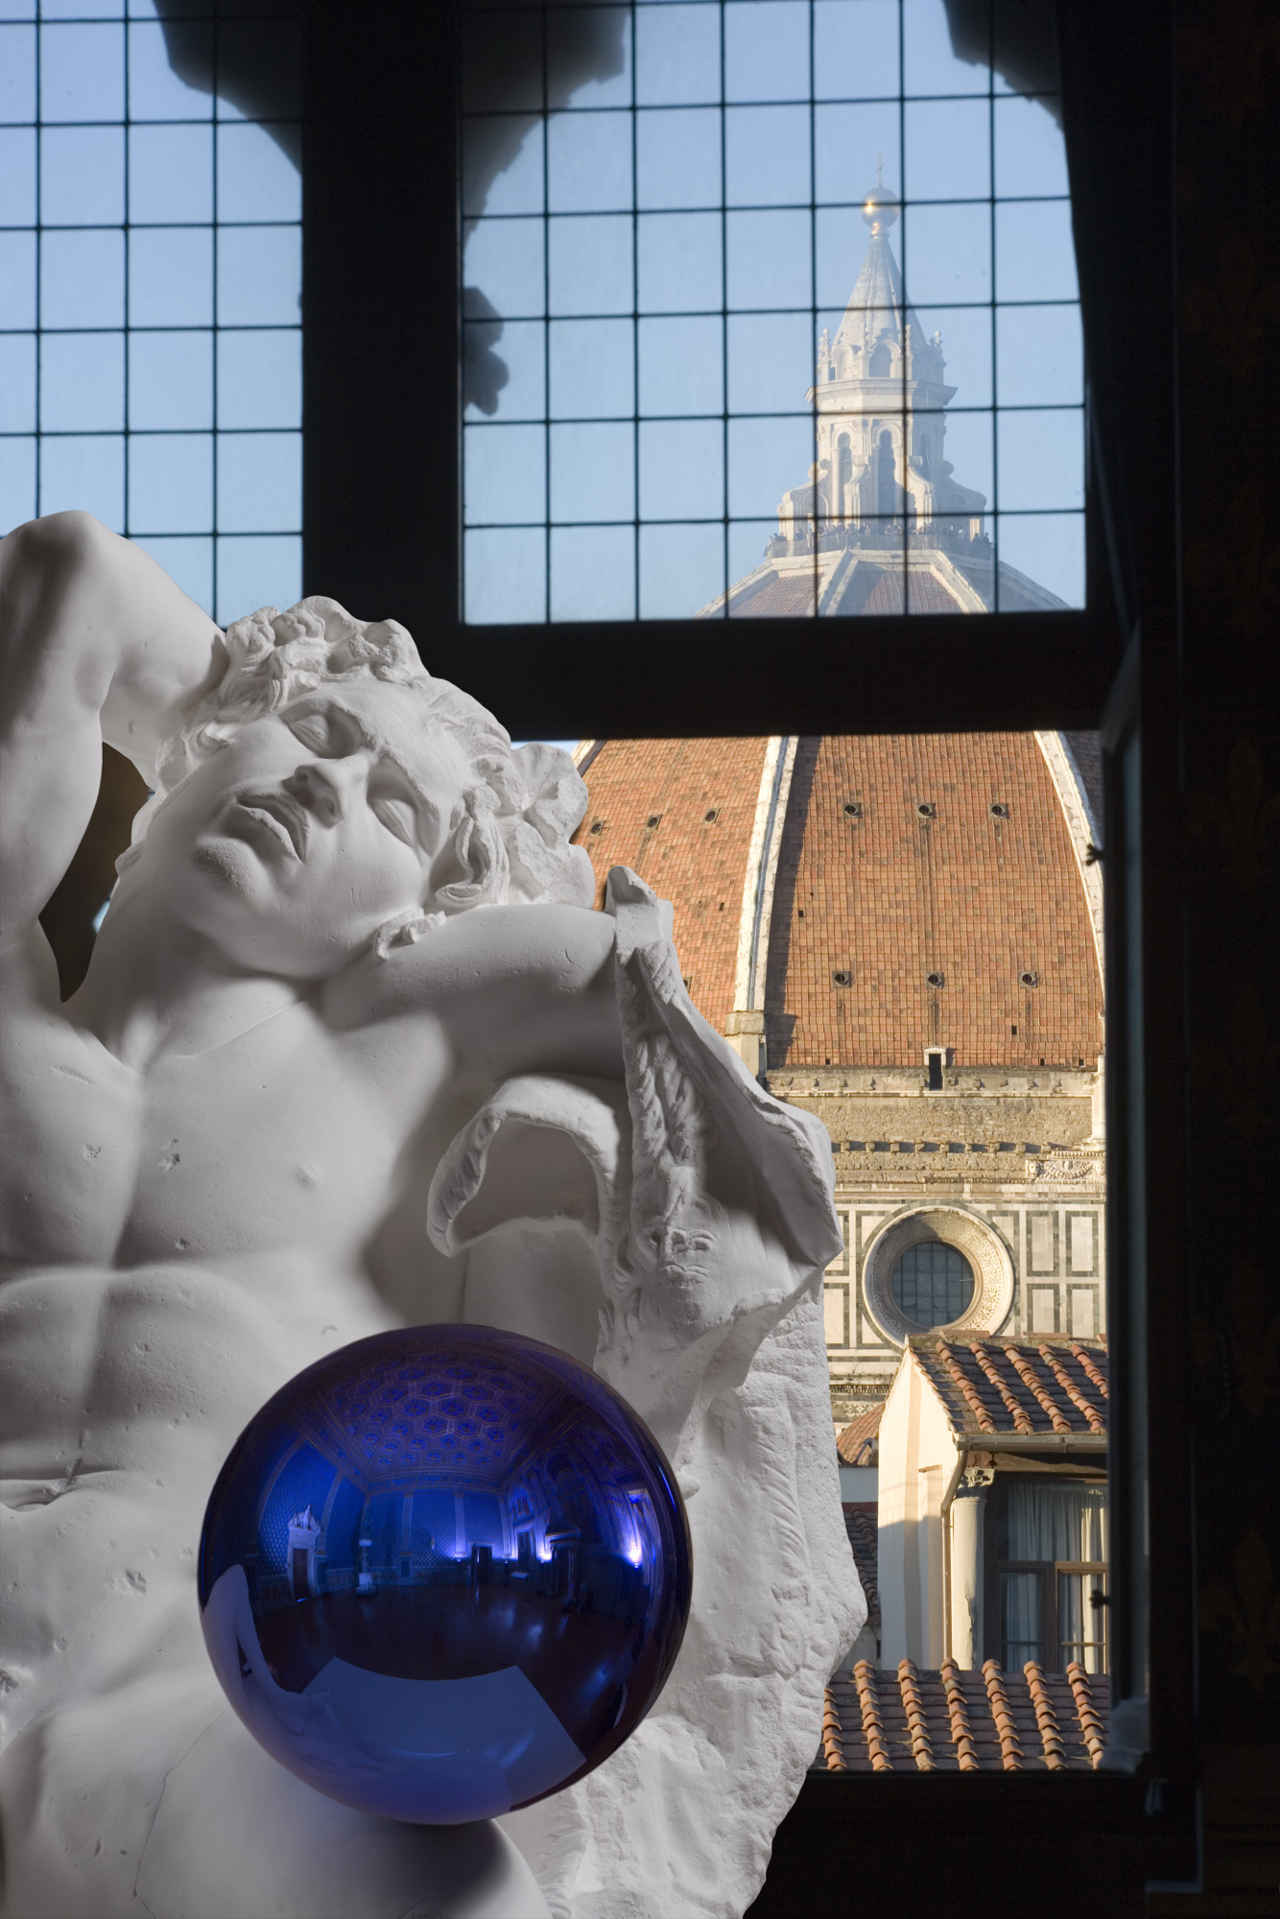 Jeff Koons on his Gazing Ball Paintings: 'It's not about copying', Jeff  Koons